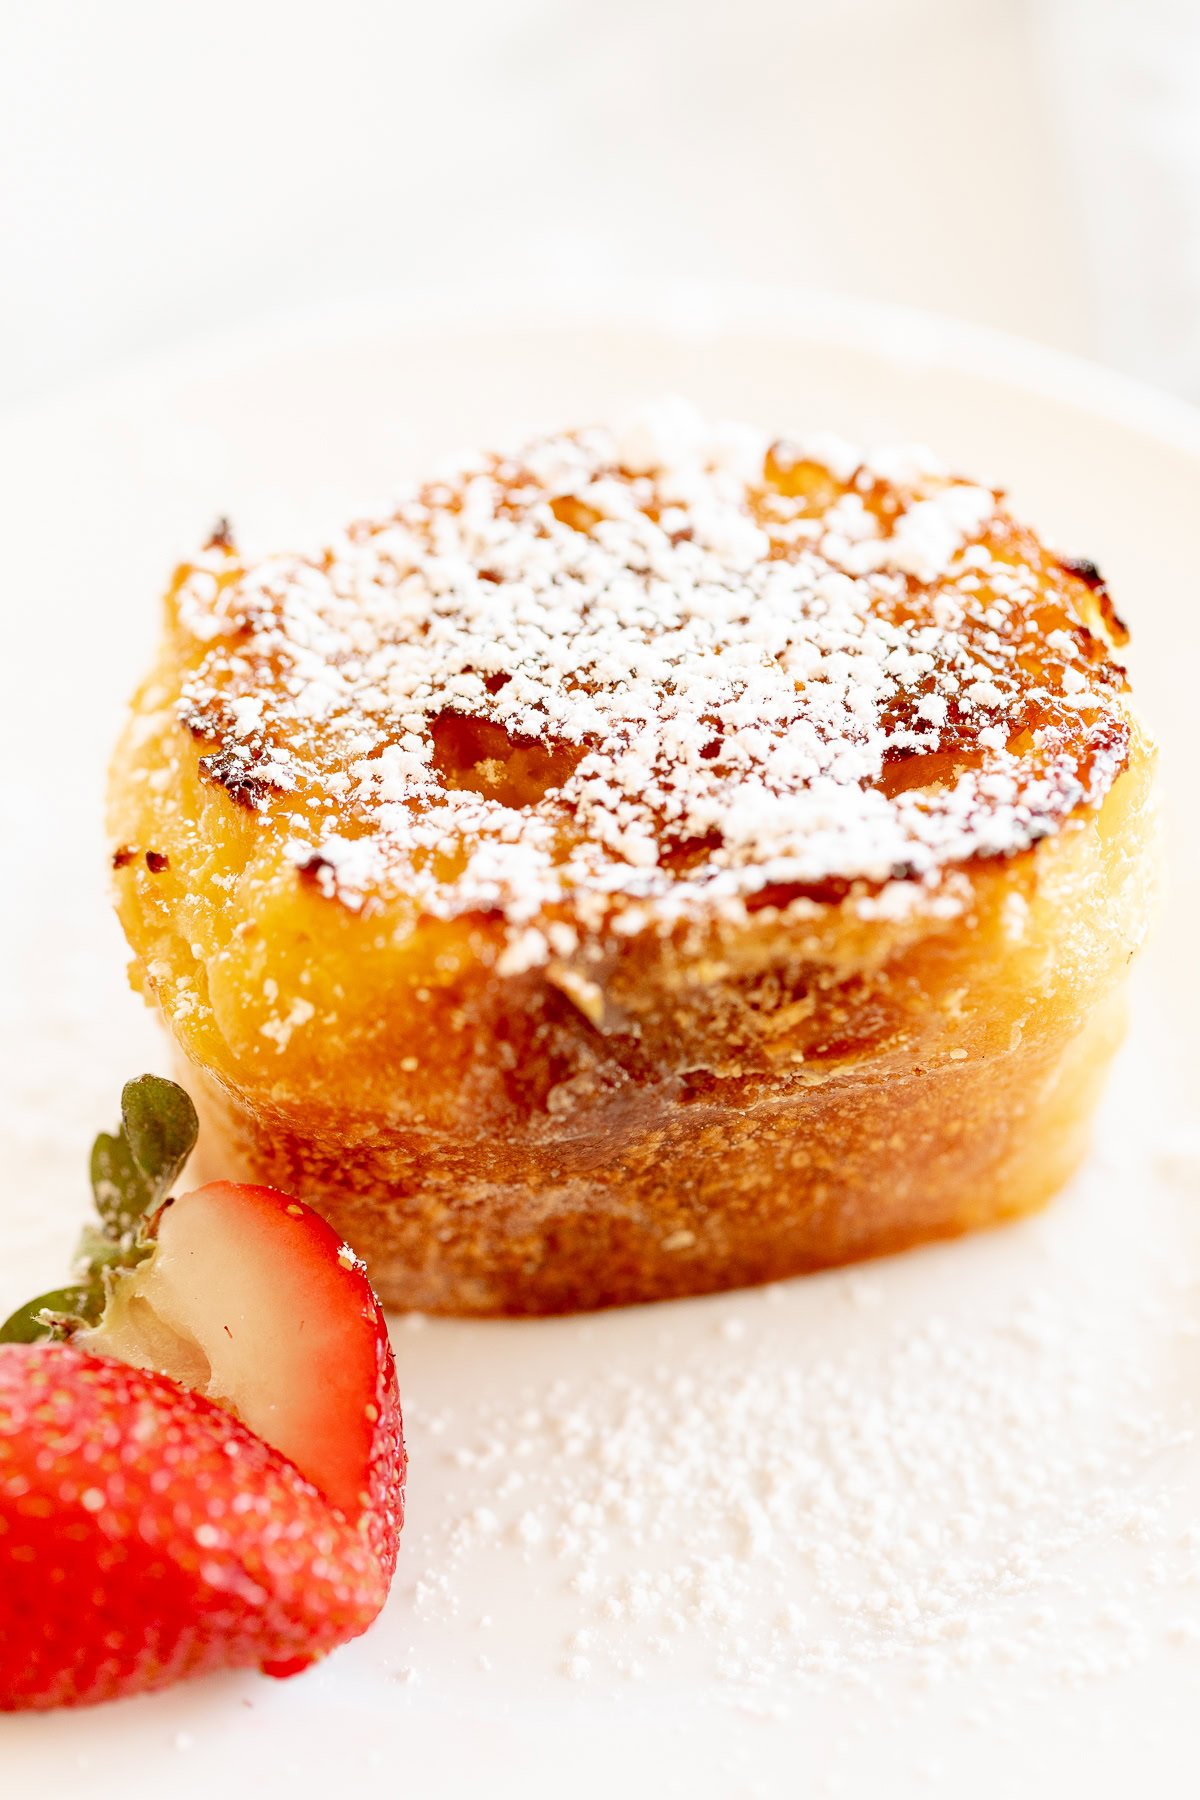 Creme Brulee French toast slice on a white plate with a gold fork. Garnished with sliced strawberries.